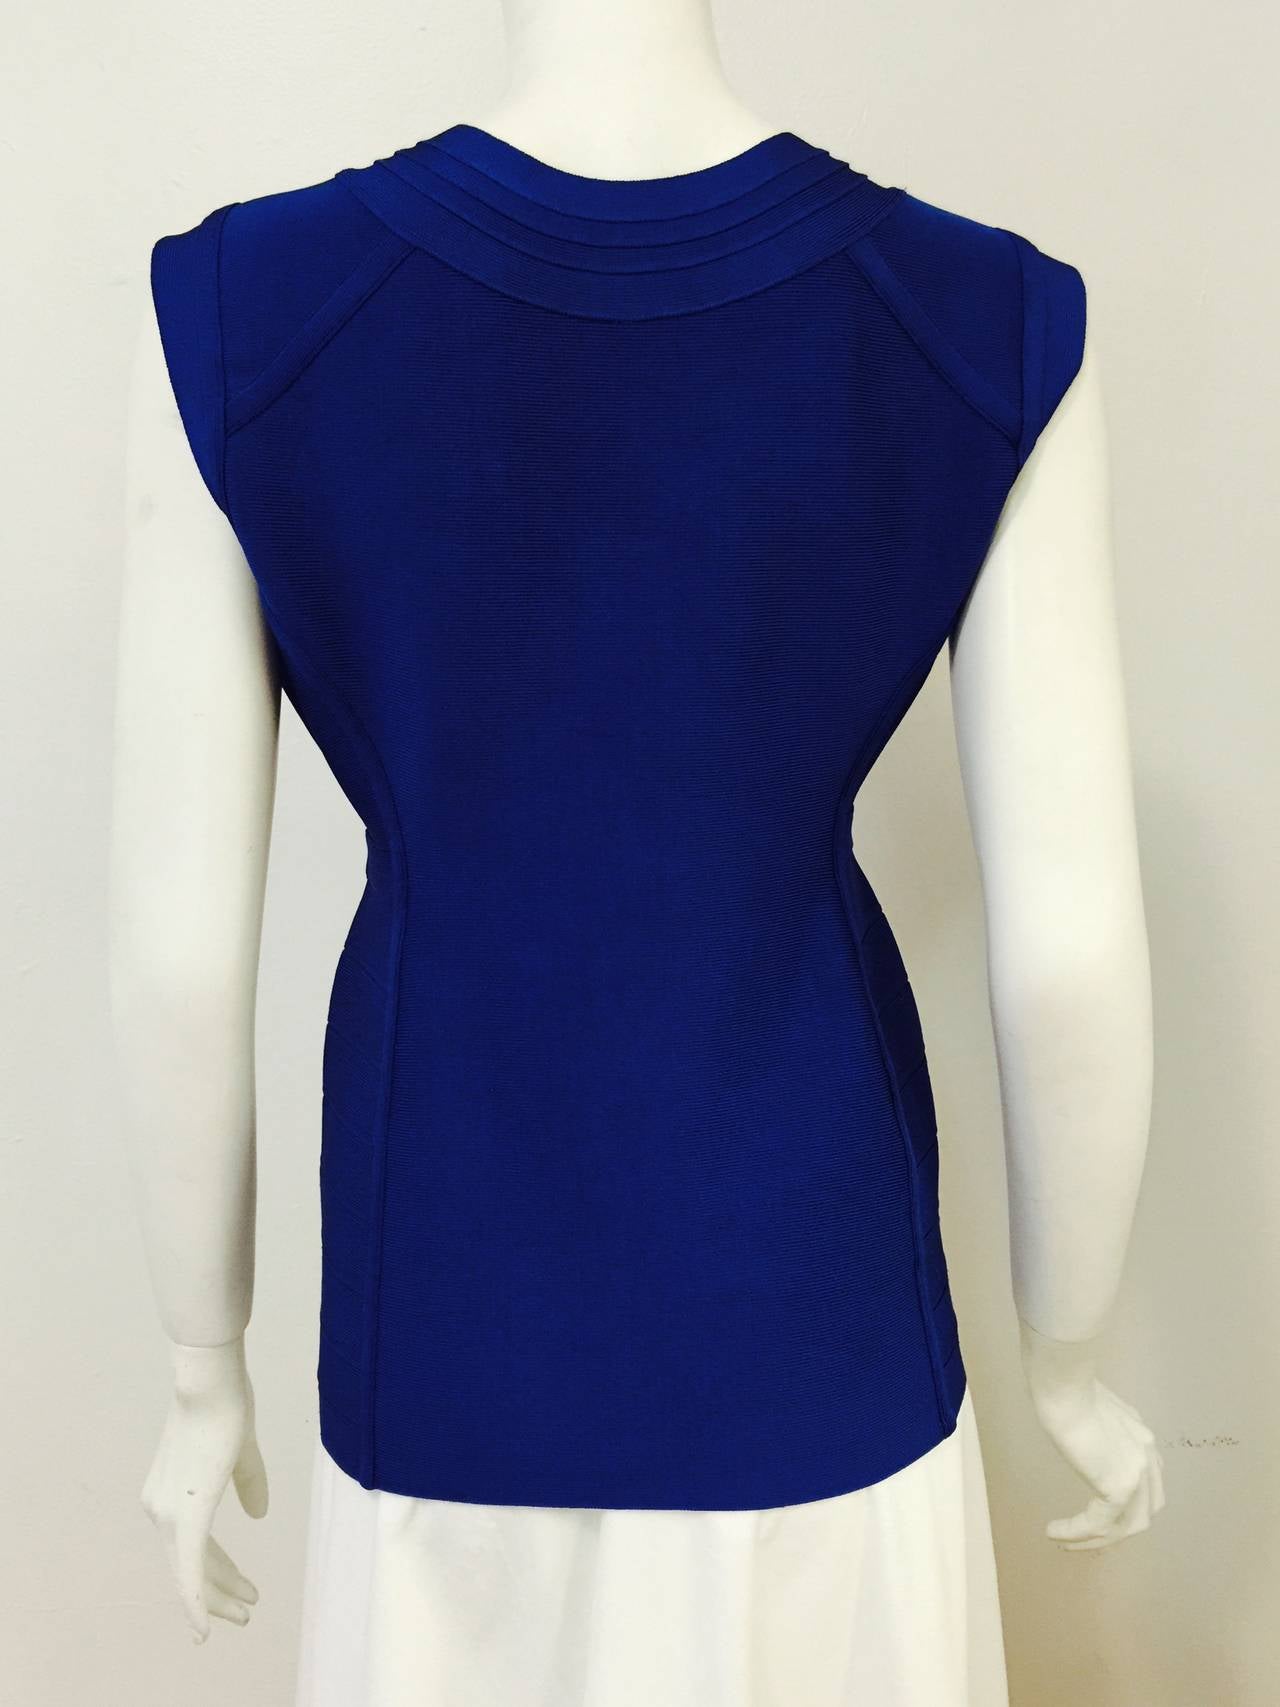 Iconic Banded Sapphire Blue Herve Leger Veleka Top In Excellent Condition For Sale In Palm Beach, FL